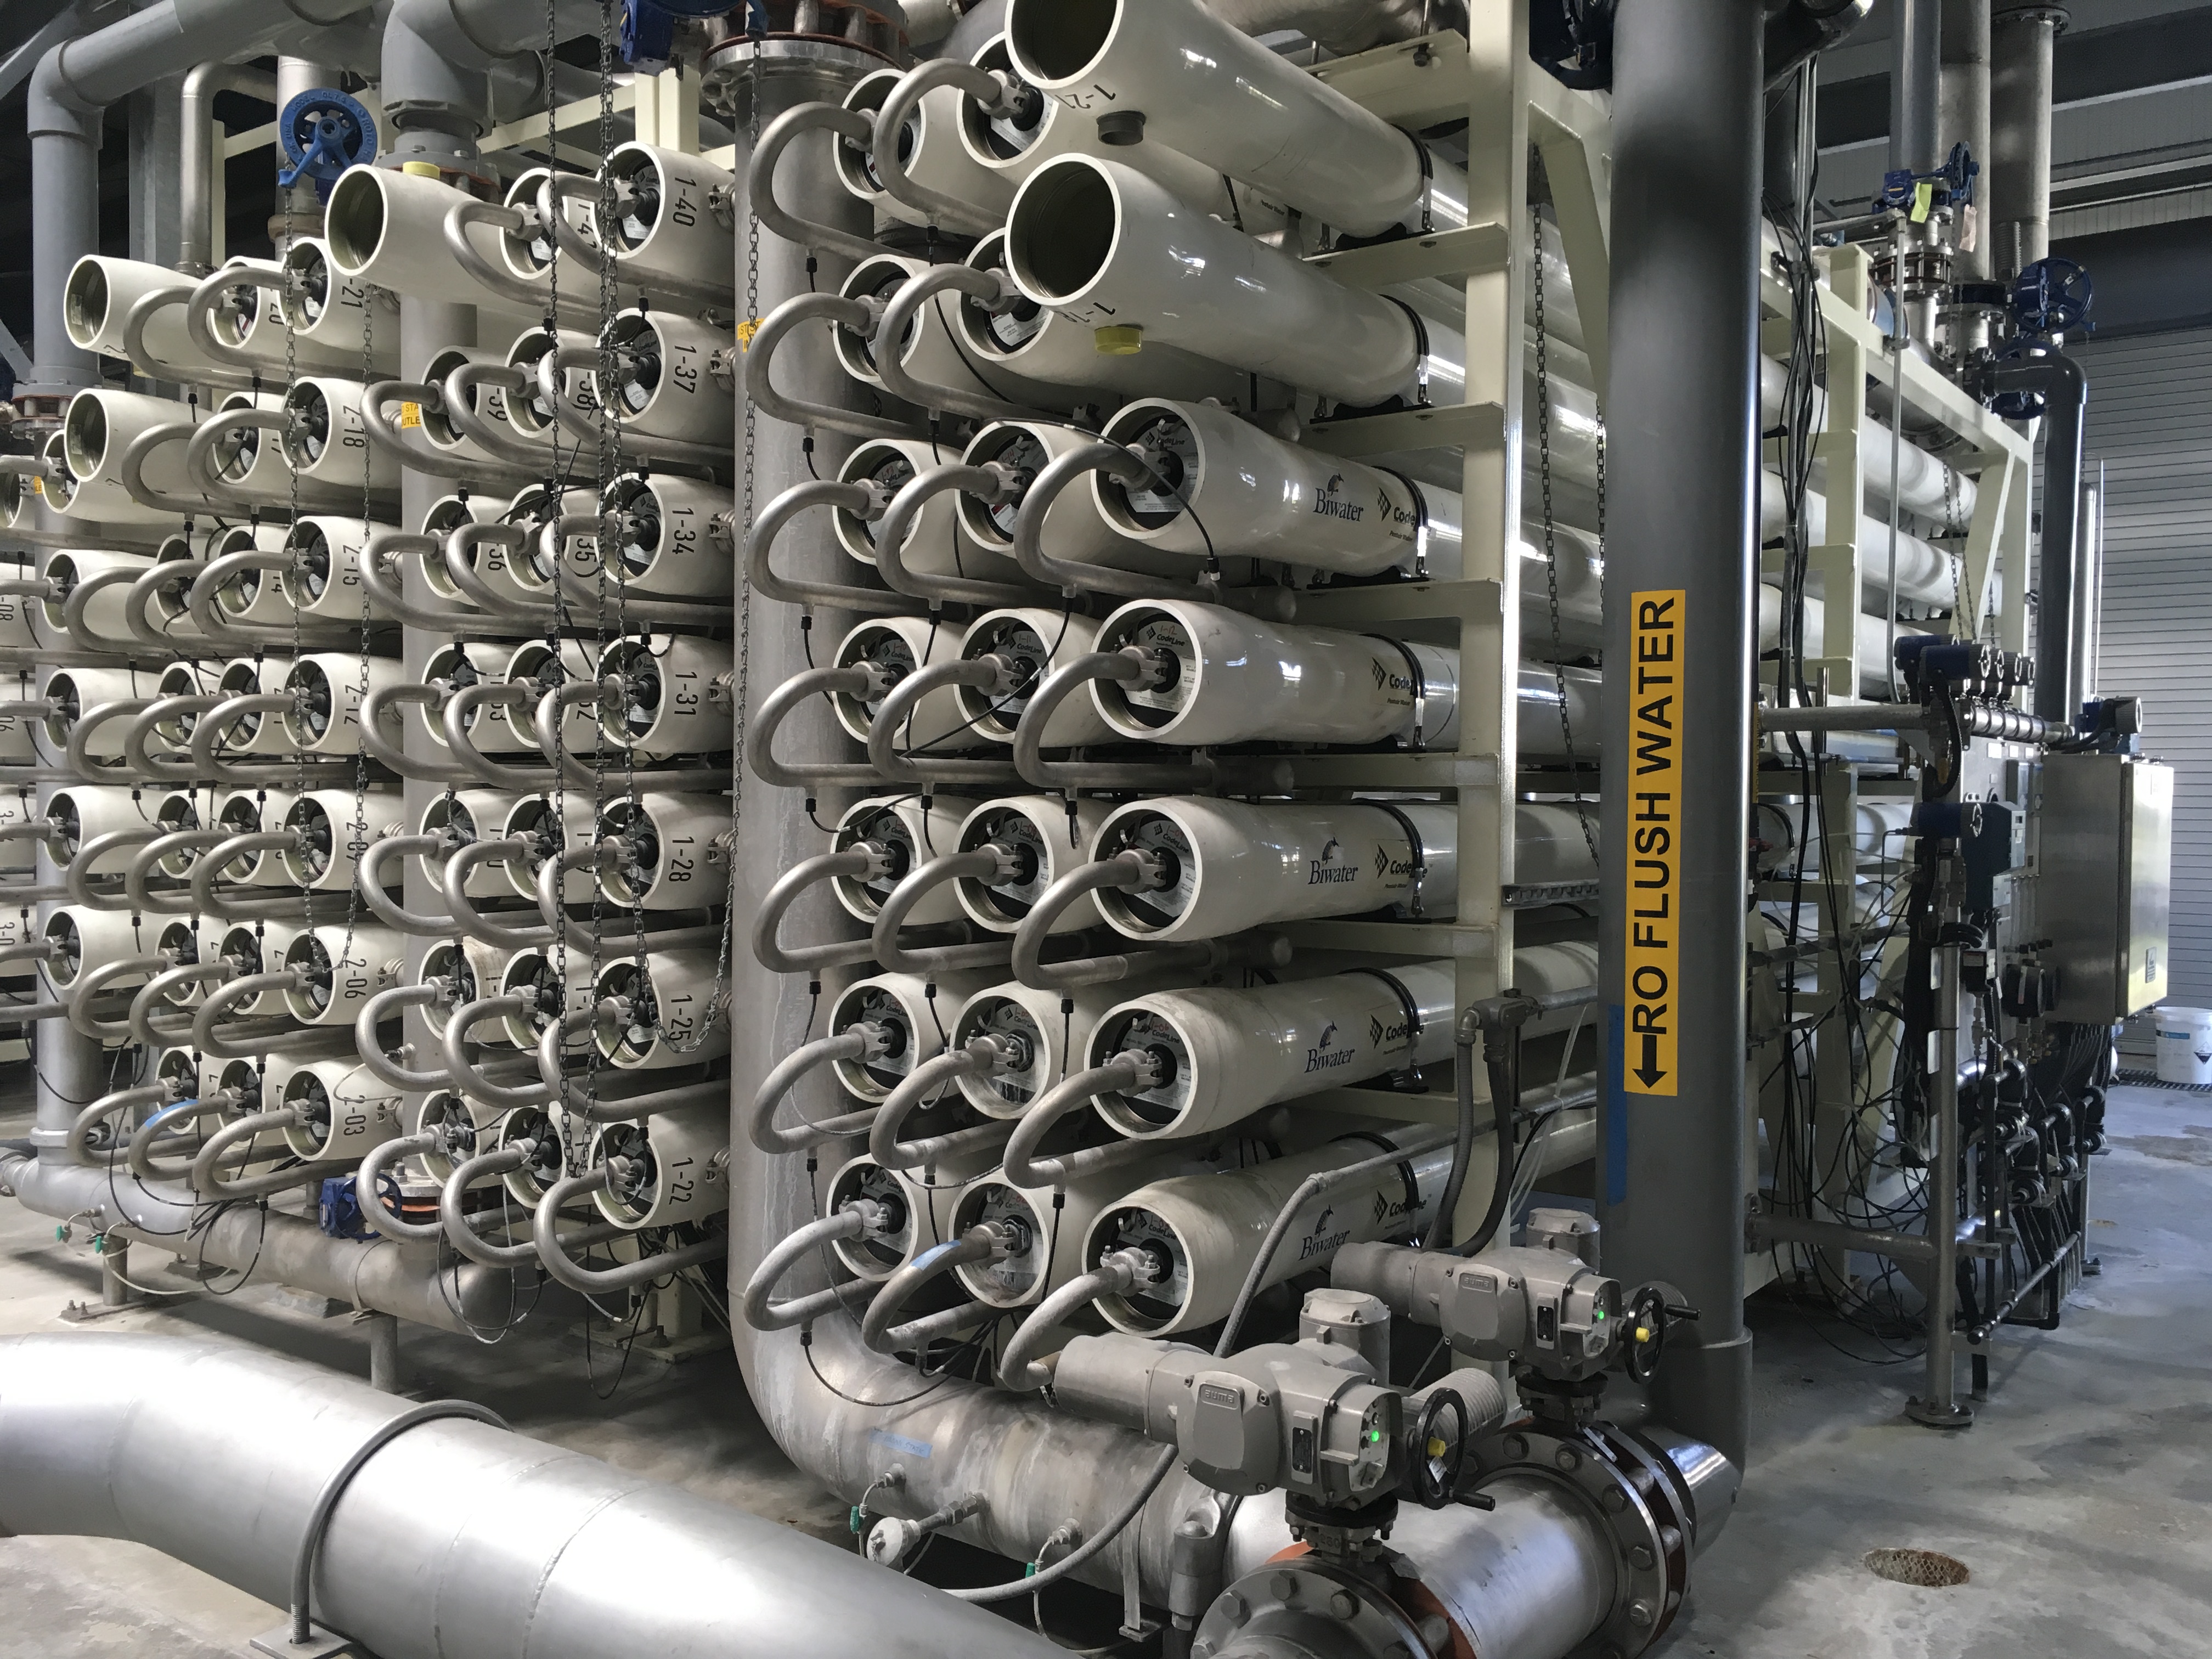 Rotec: High Recovery RO Technologies & Water Desalination